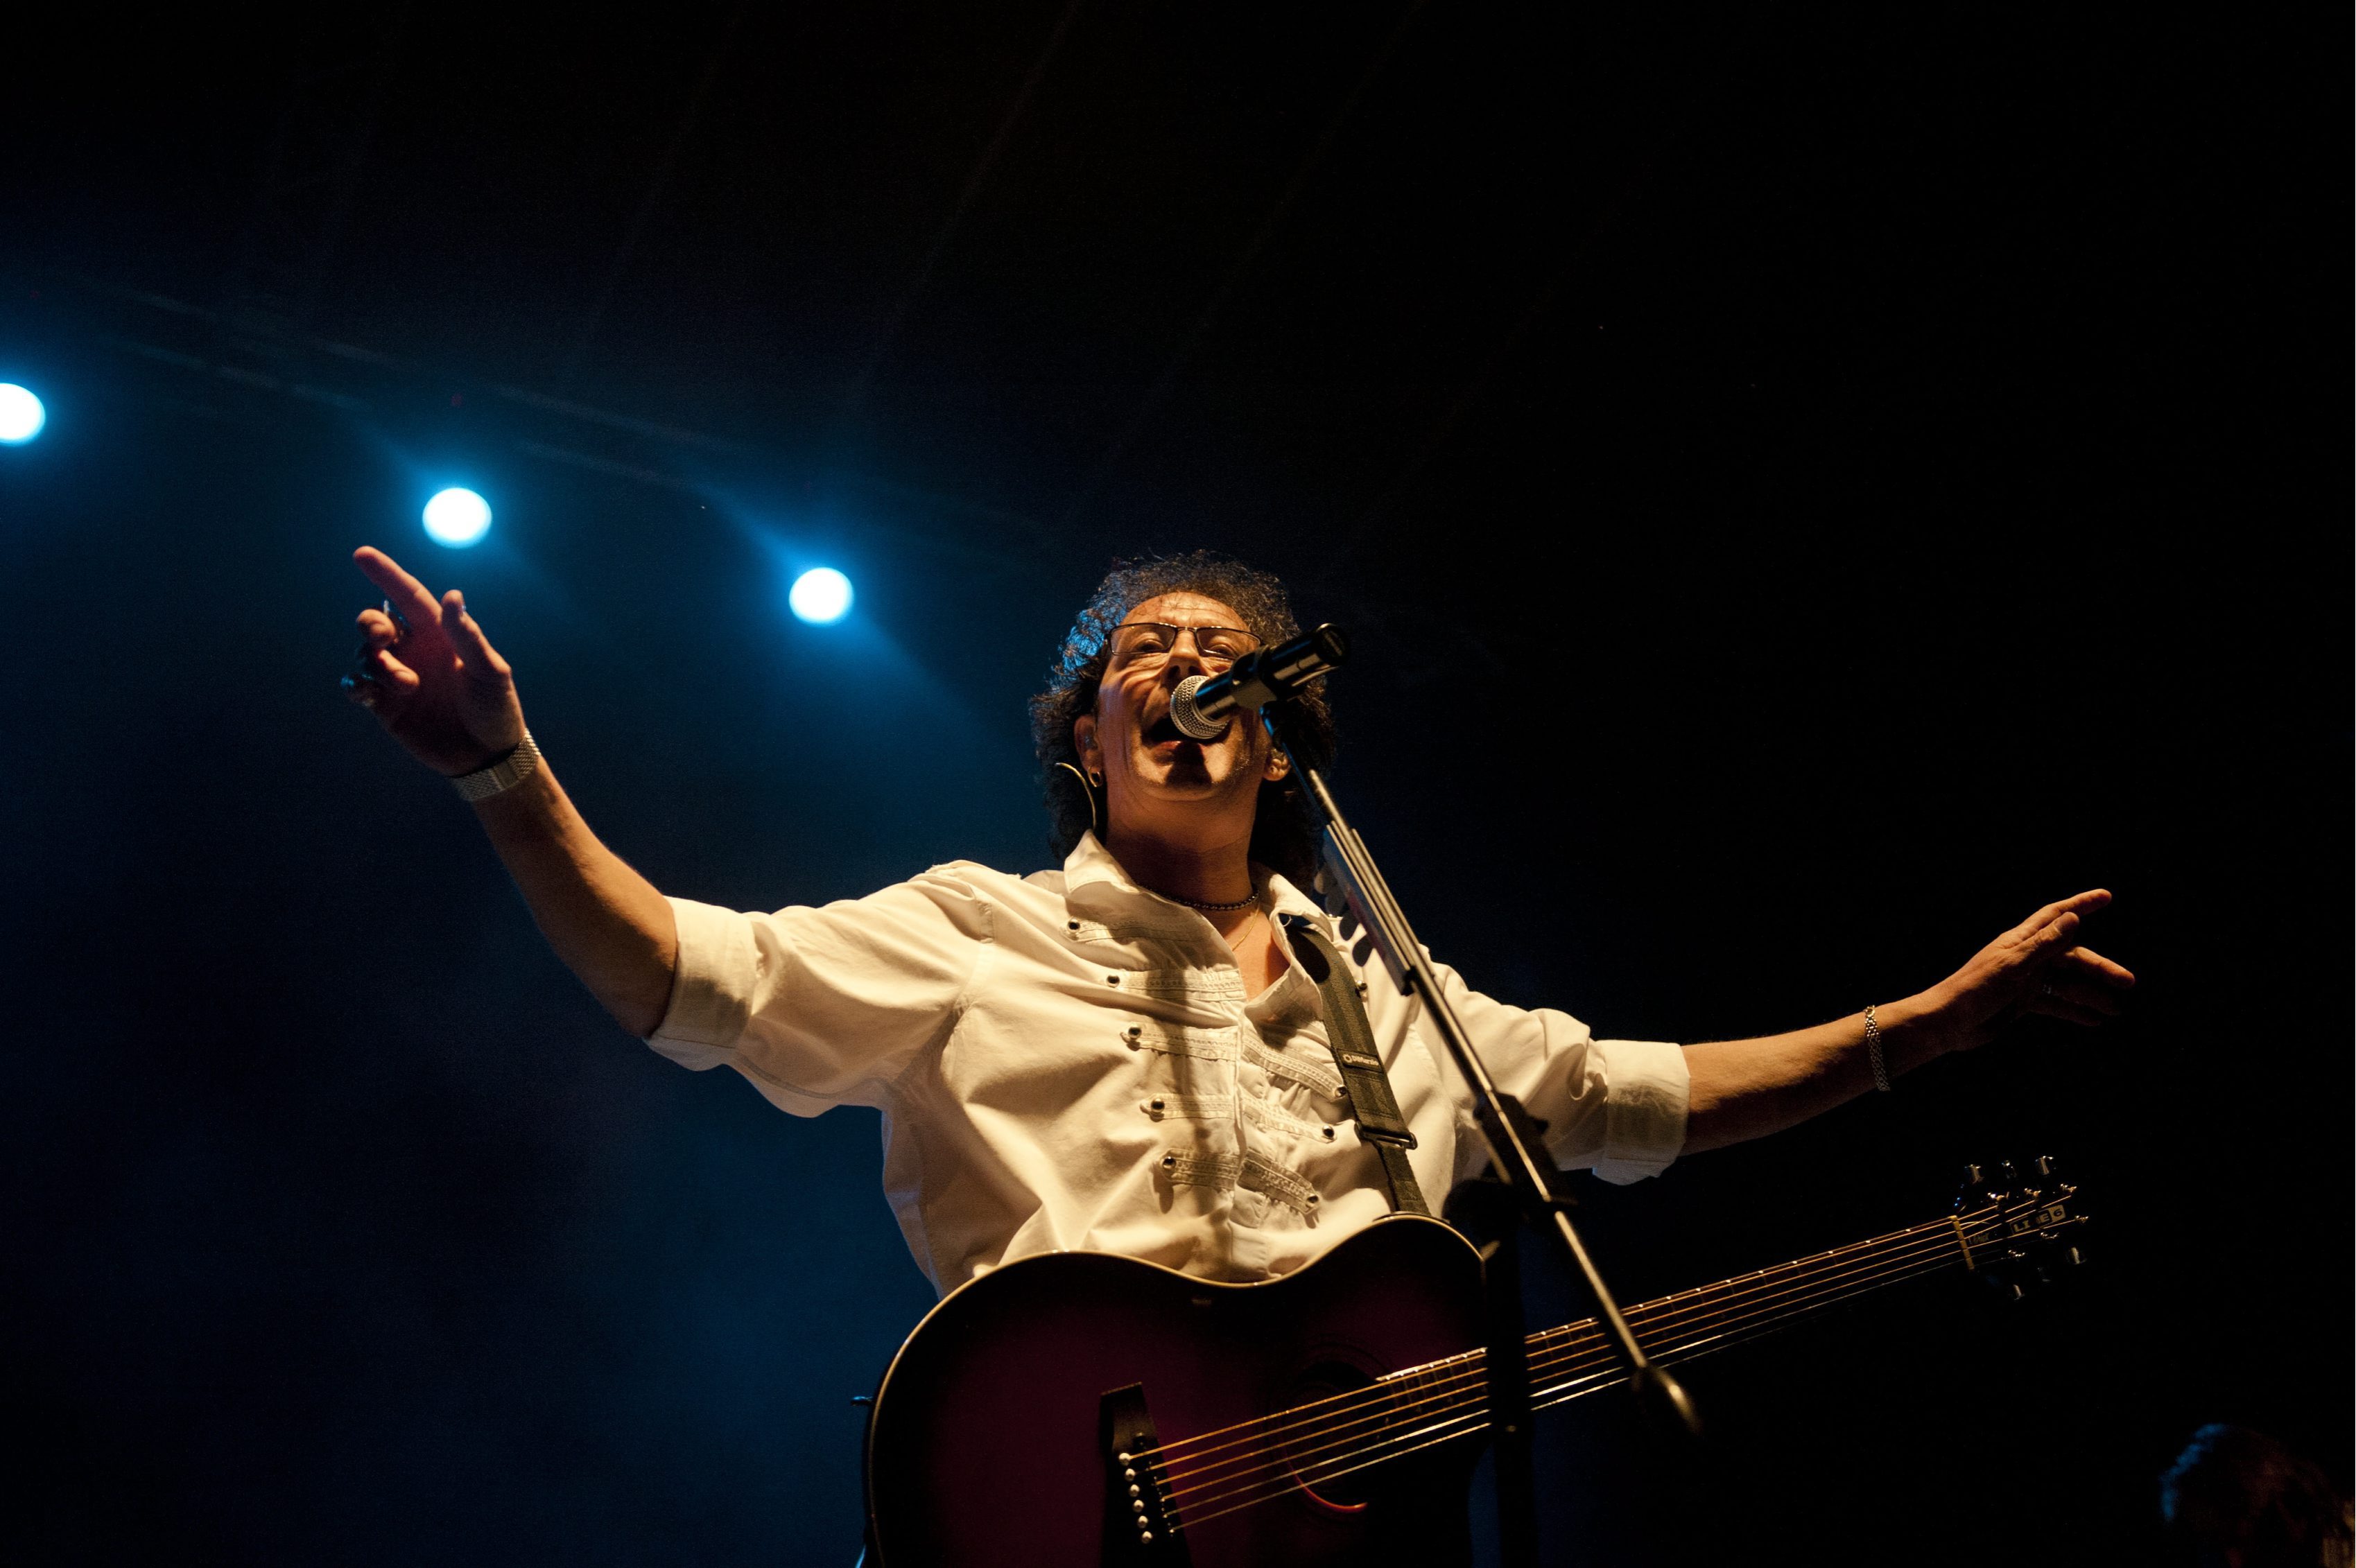 Mike Craft of English rock band, Smokie perform live at the KKNK arts festival in Oudtshoorn, South Africa on 4 April 2011. (Photo by Gallo Images/Foto24/Jaco Marais)